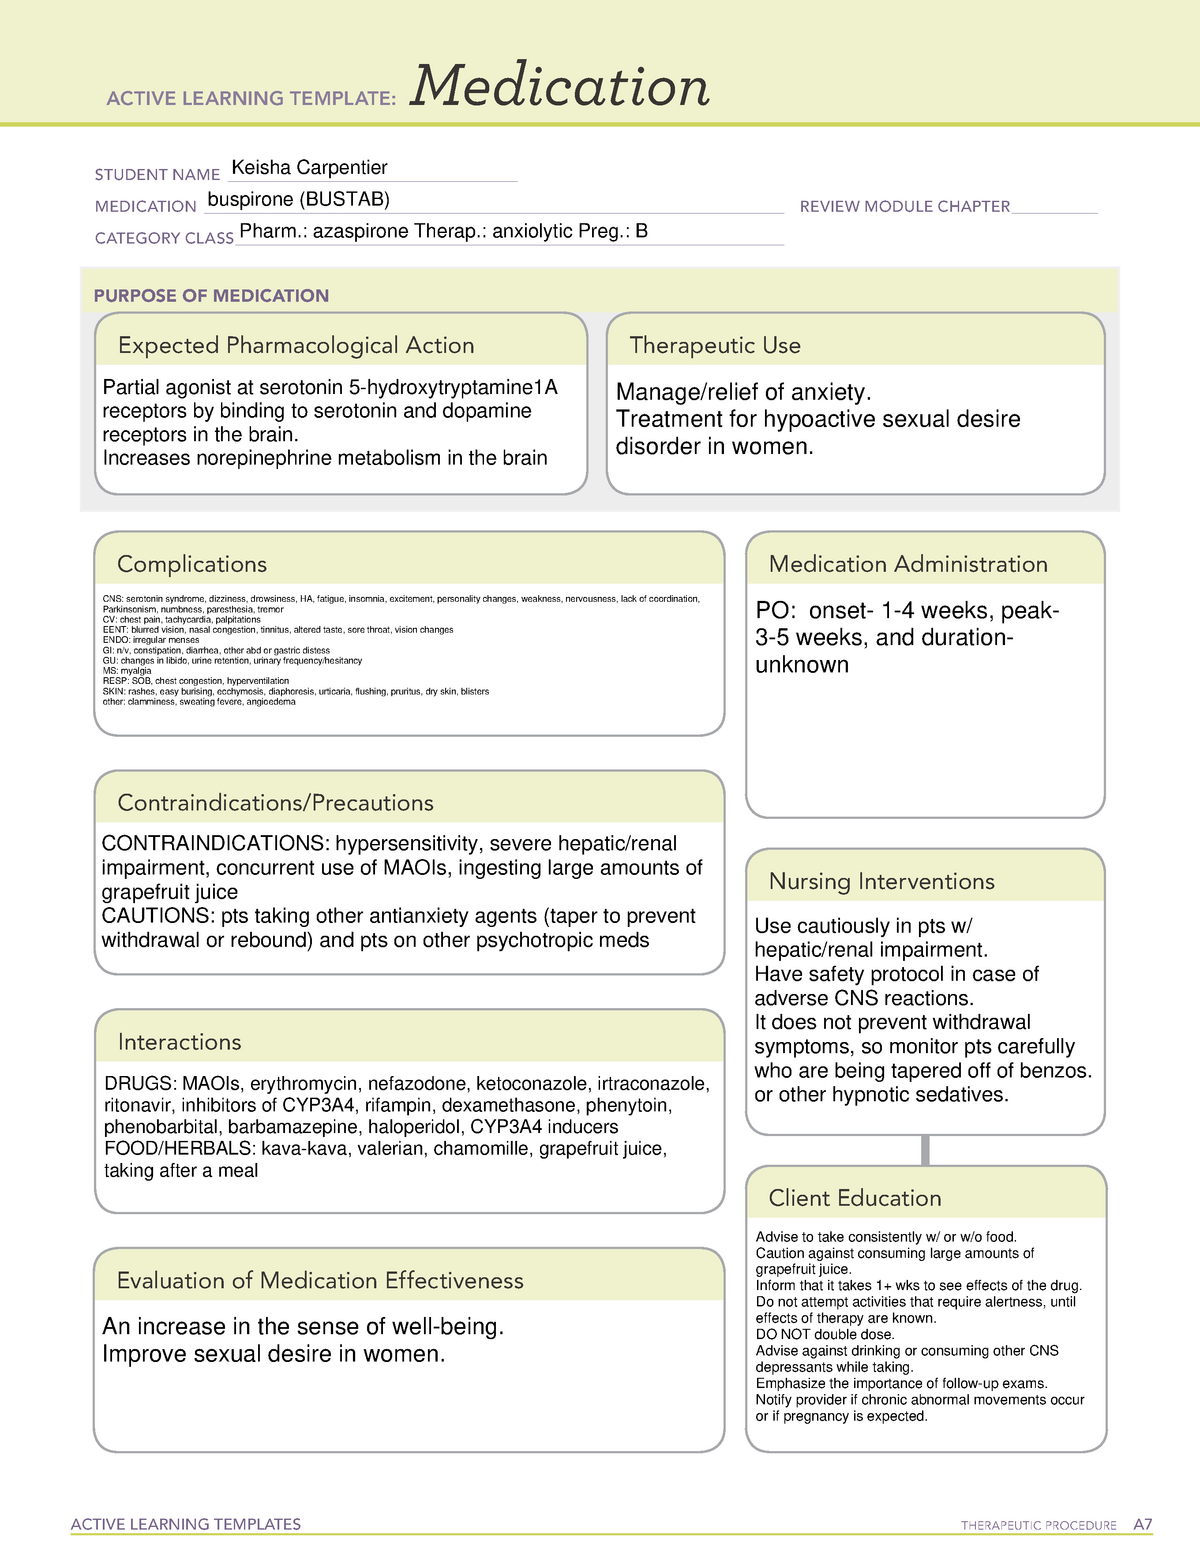 Buspirone ATI Med card ACTIVE LEARNING TEMPLATES THERAPEUTIC